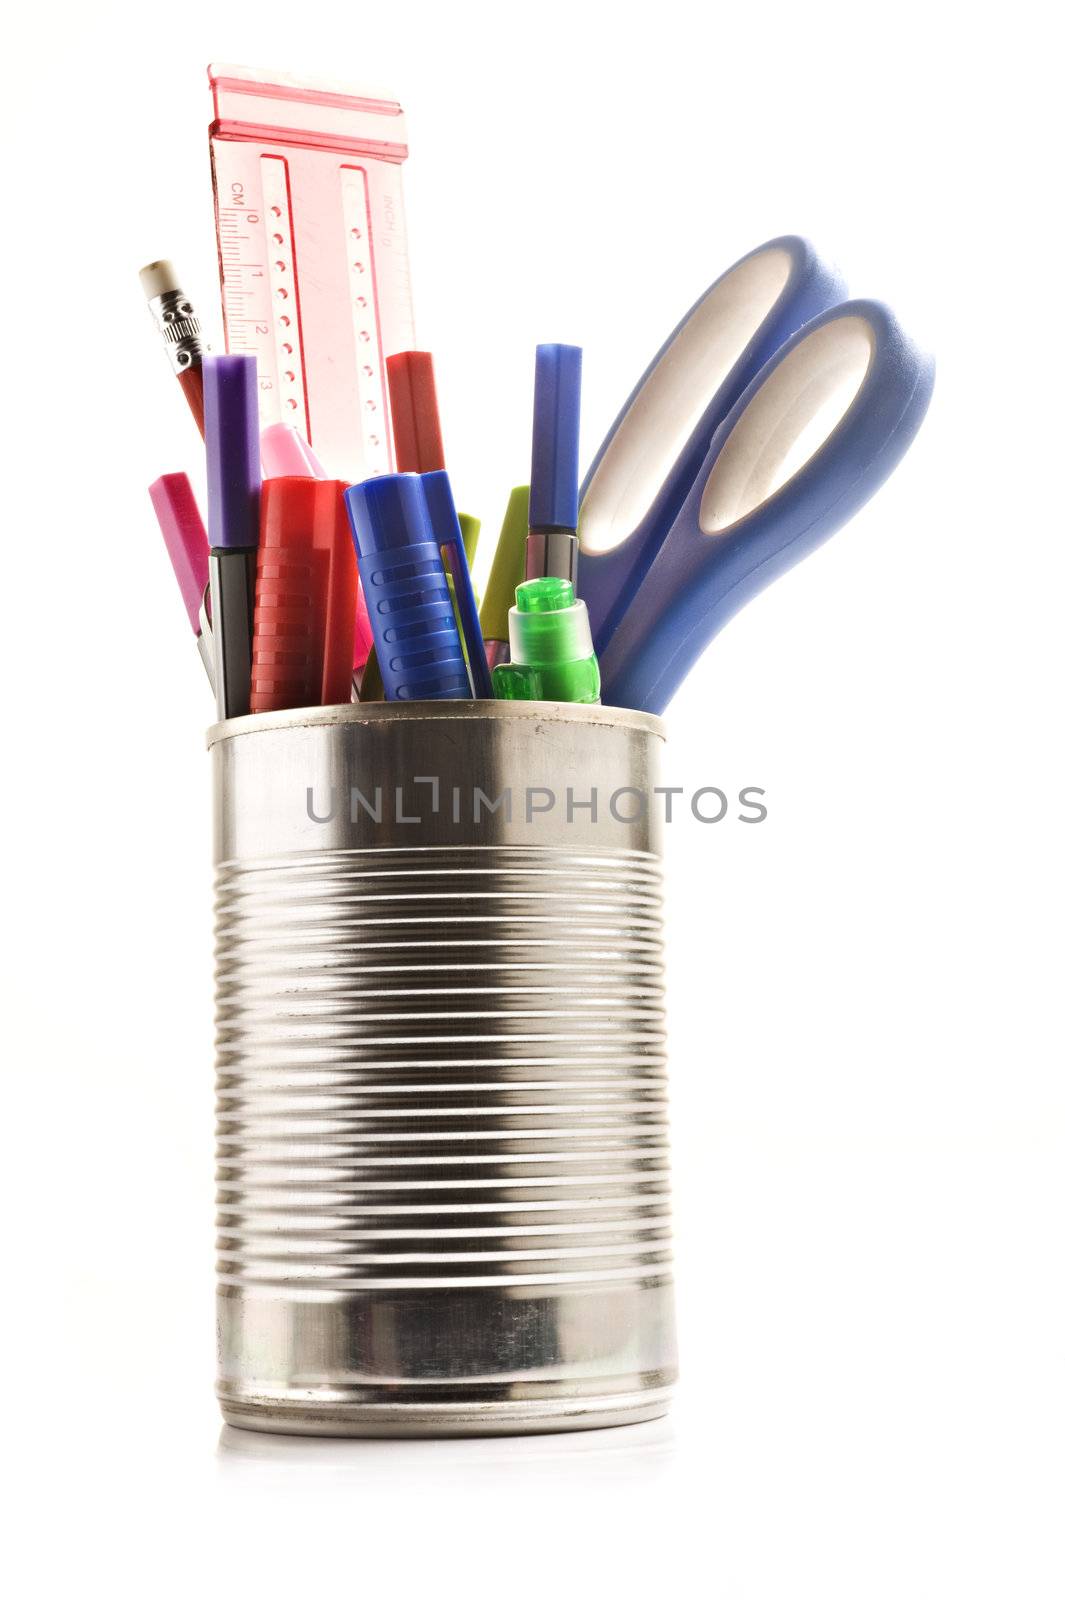 Tin can with stationery on white background